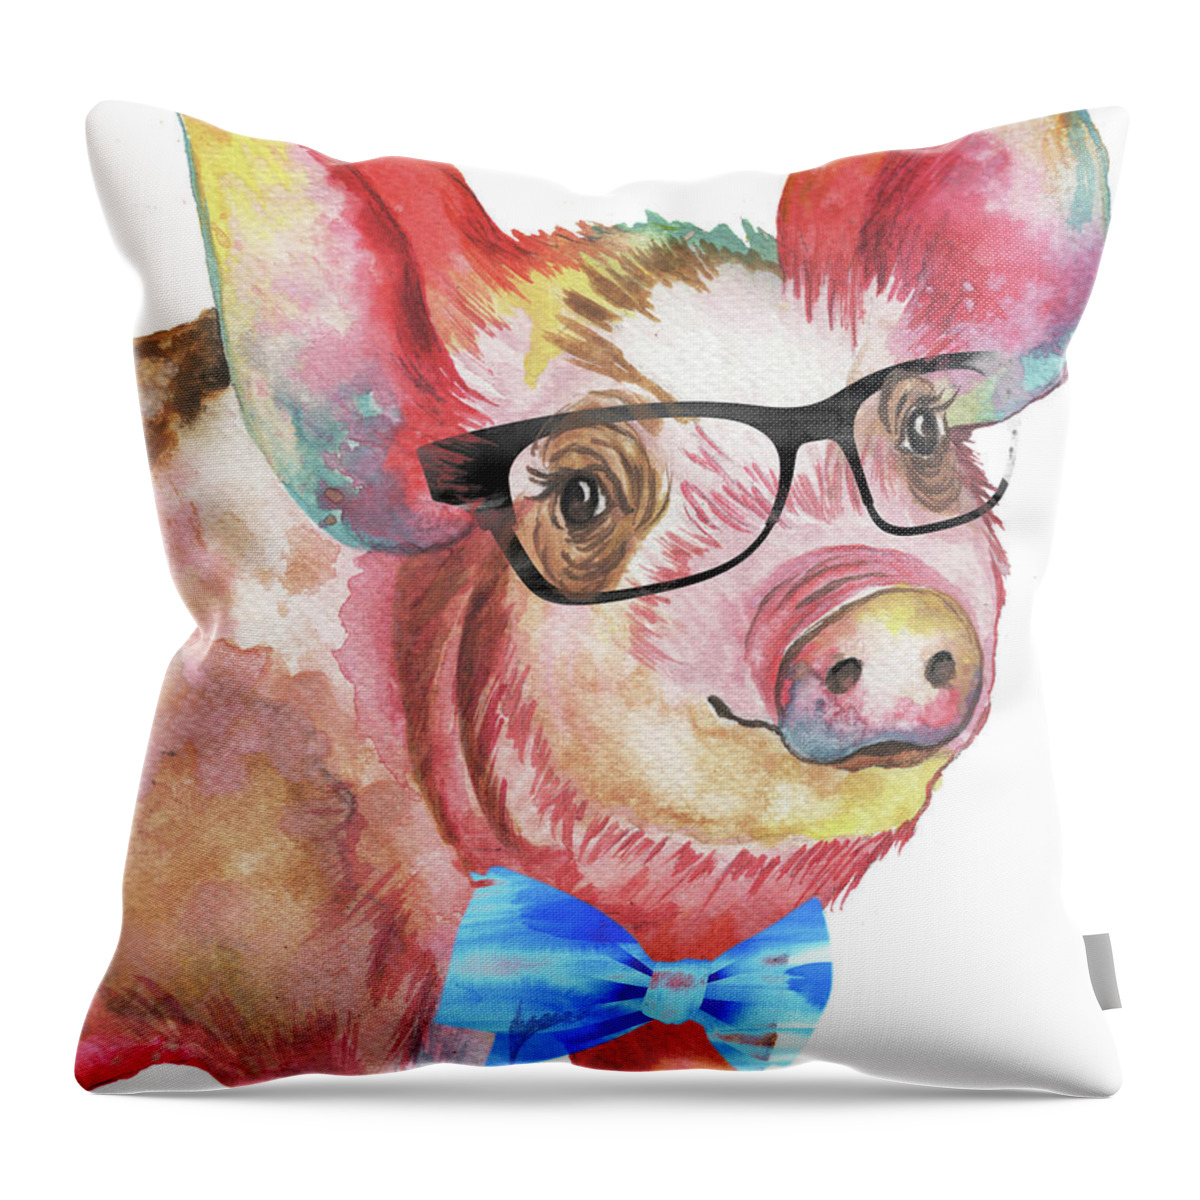 Nerdy Throw Pillow featuring the mixed media Nerdy Pig #1 by Elizabeth Medley